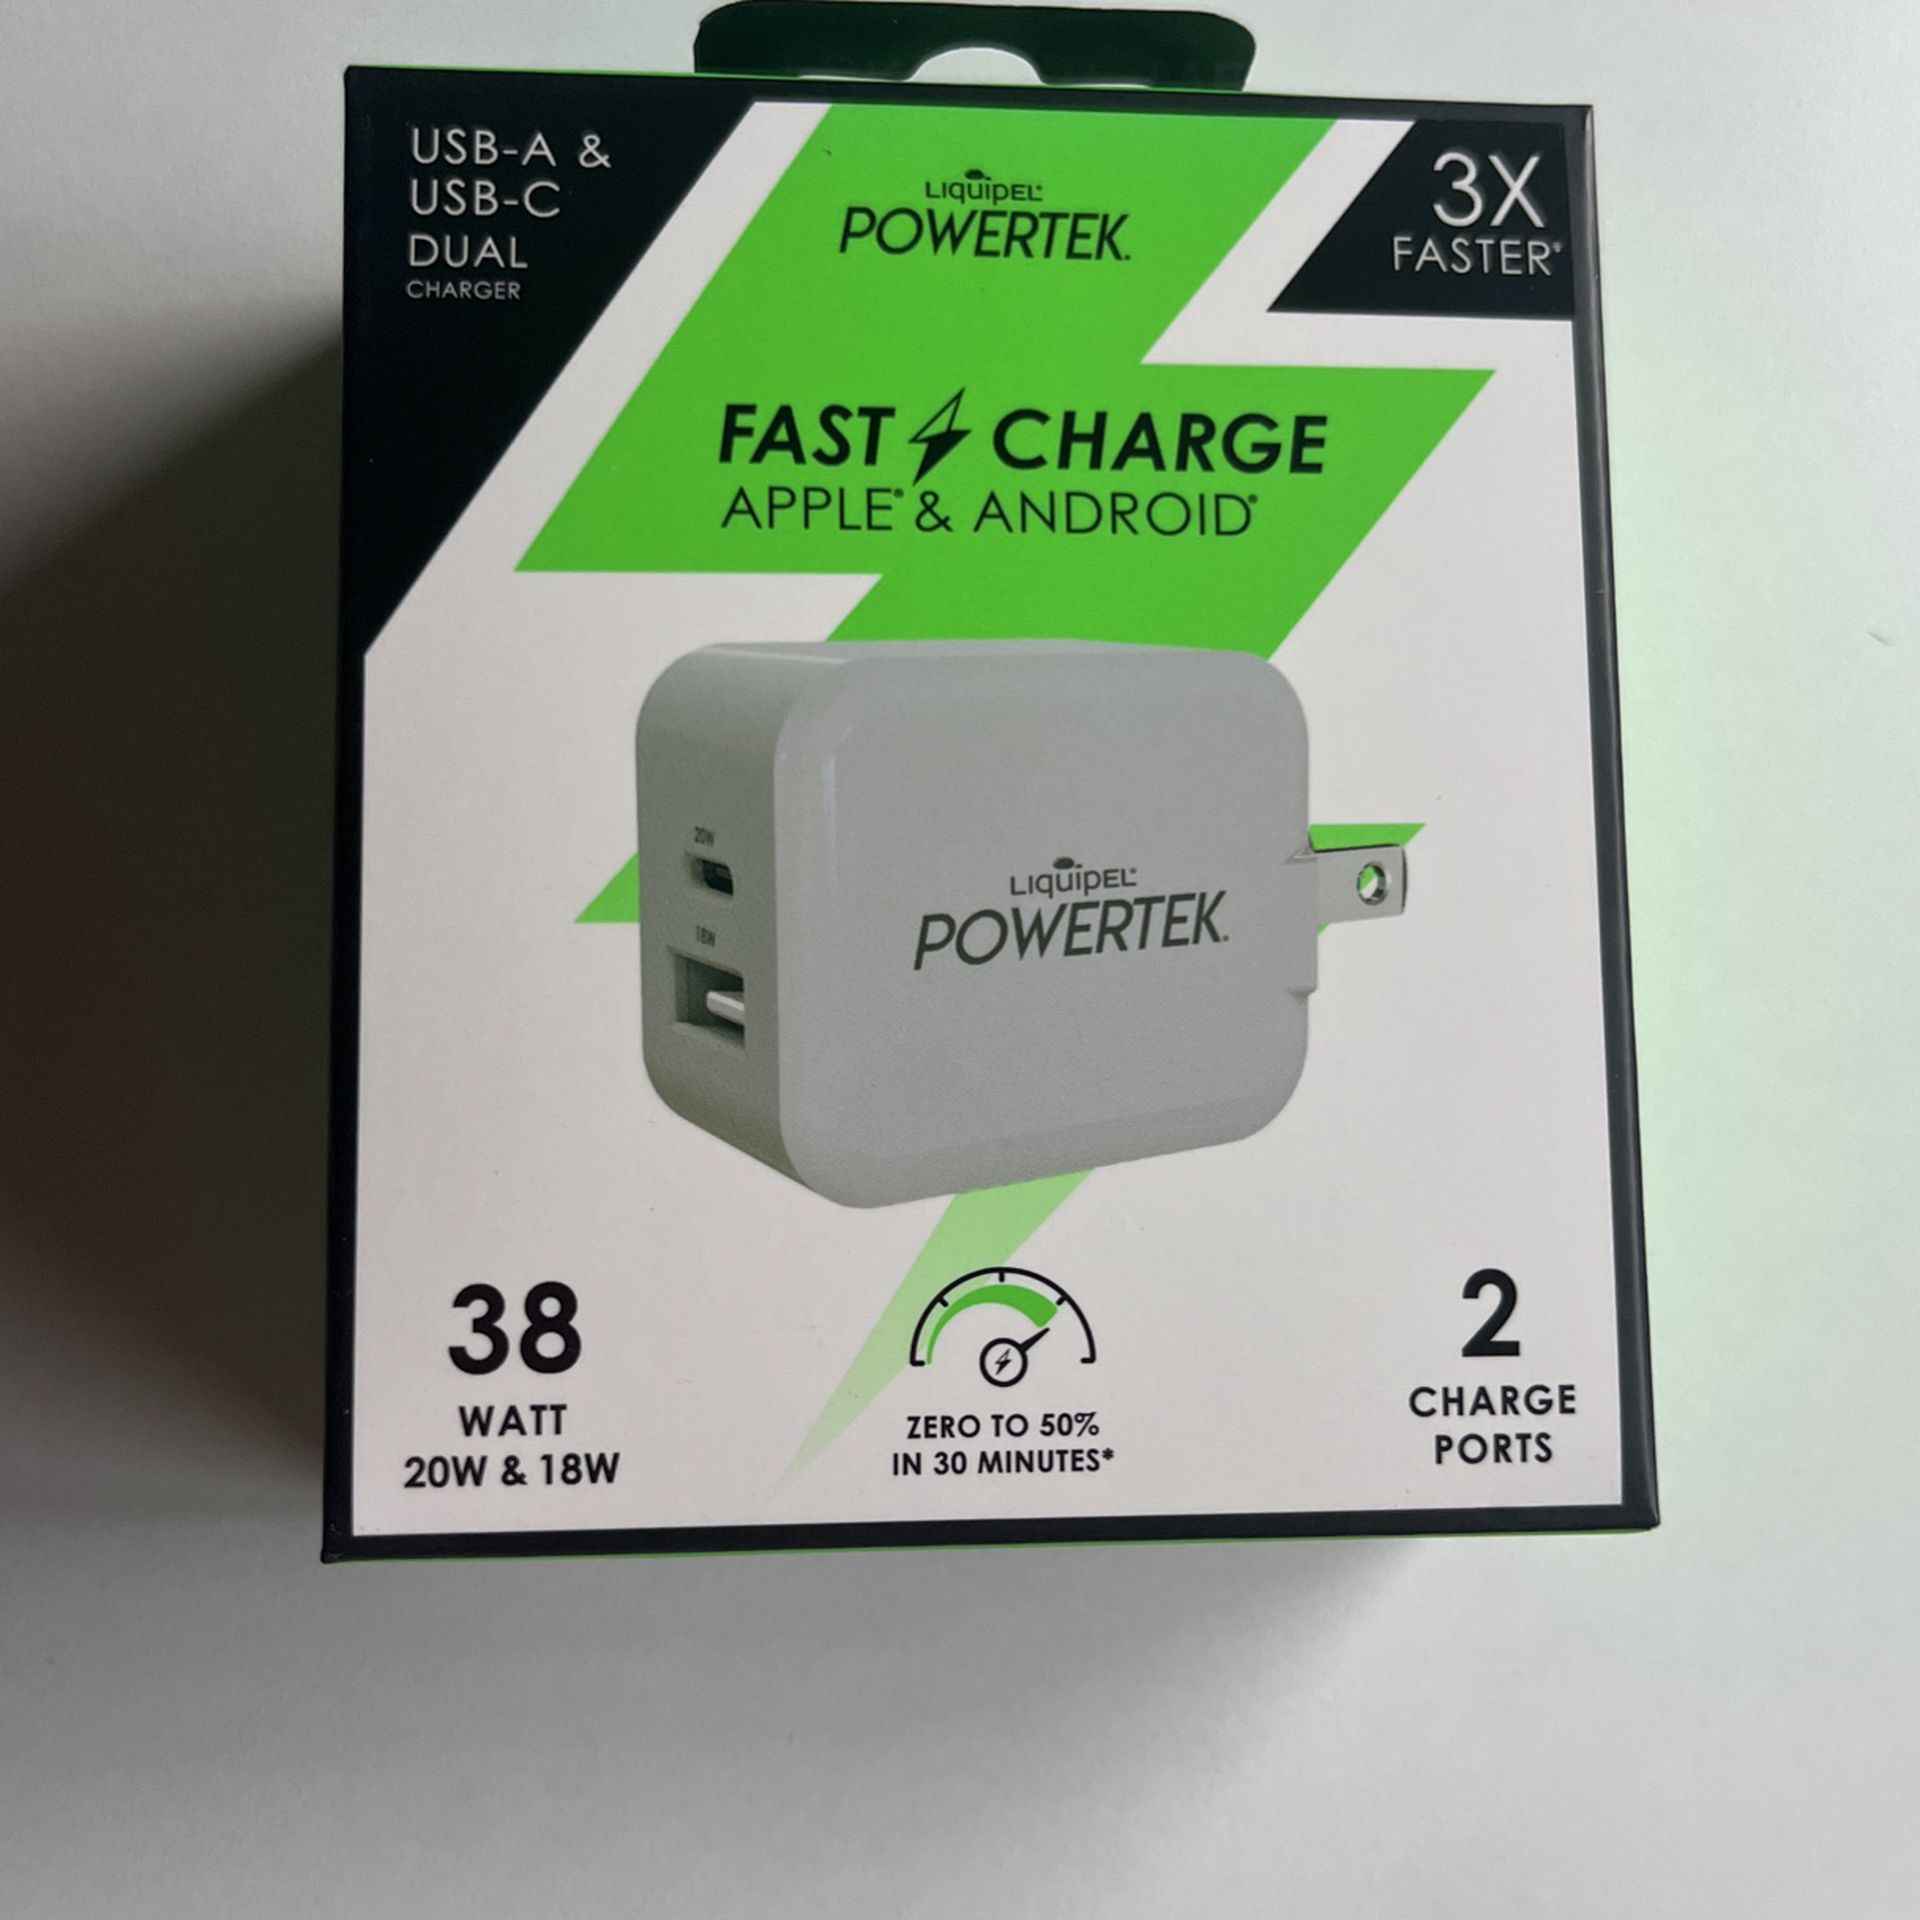 Fast Charge Dual Charger $5